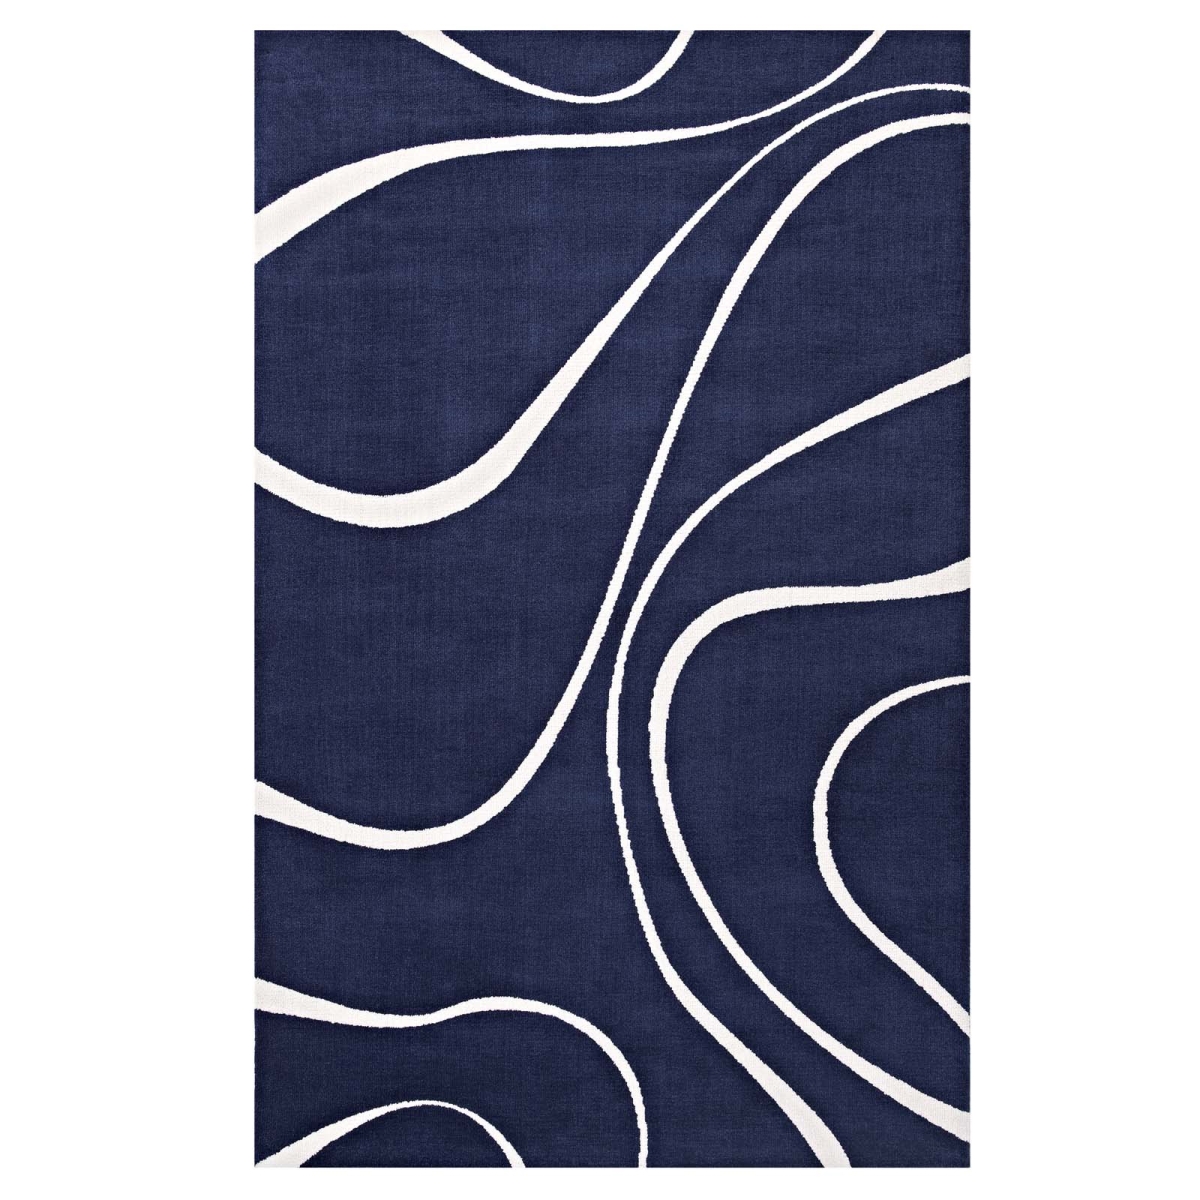 R-1002a-810 8 X 10 Ft. Therese Abstract Swirl Polyester Area Rug - Navy & Ivory, 0.5 X 96 X 120 In.